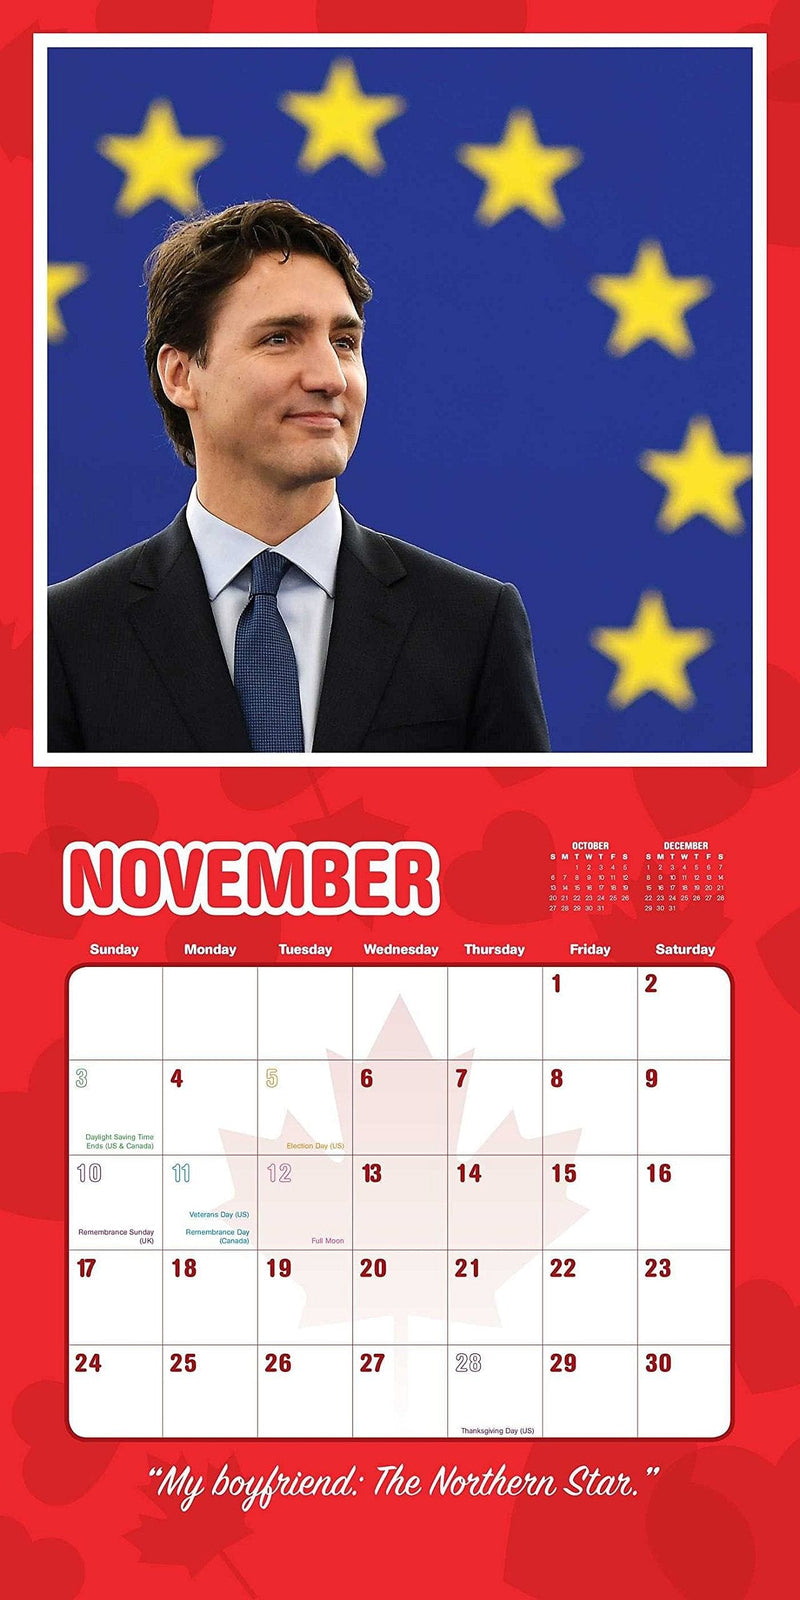 2019 Justin Trudeau Wall Calendar - Shelburne Country Store